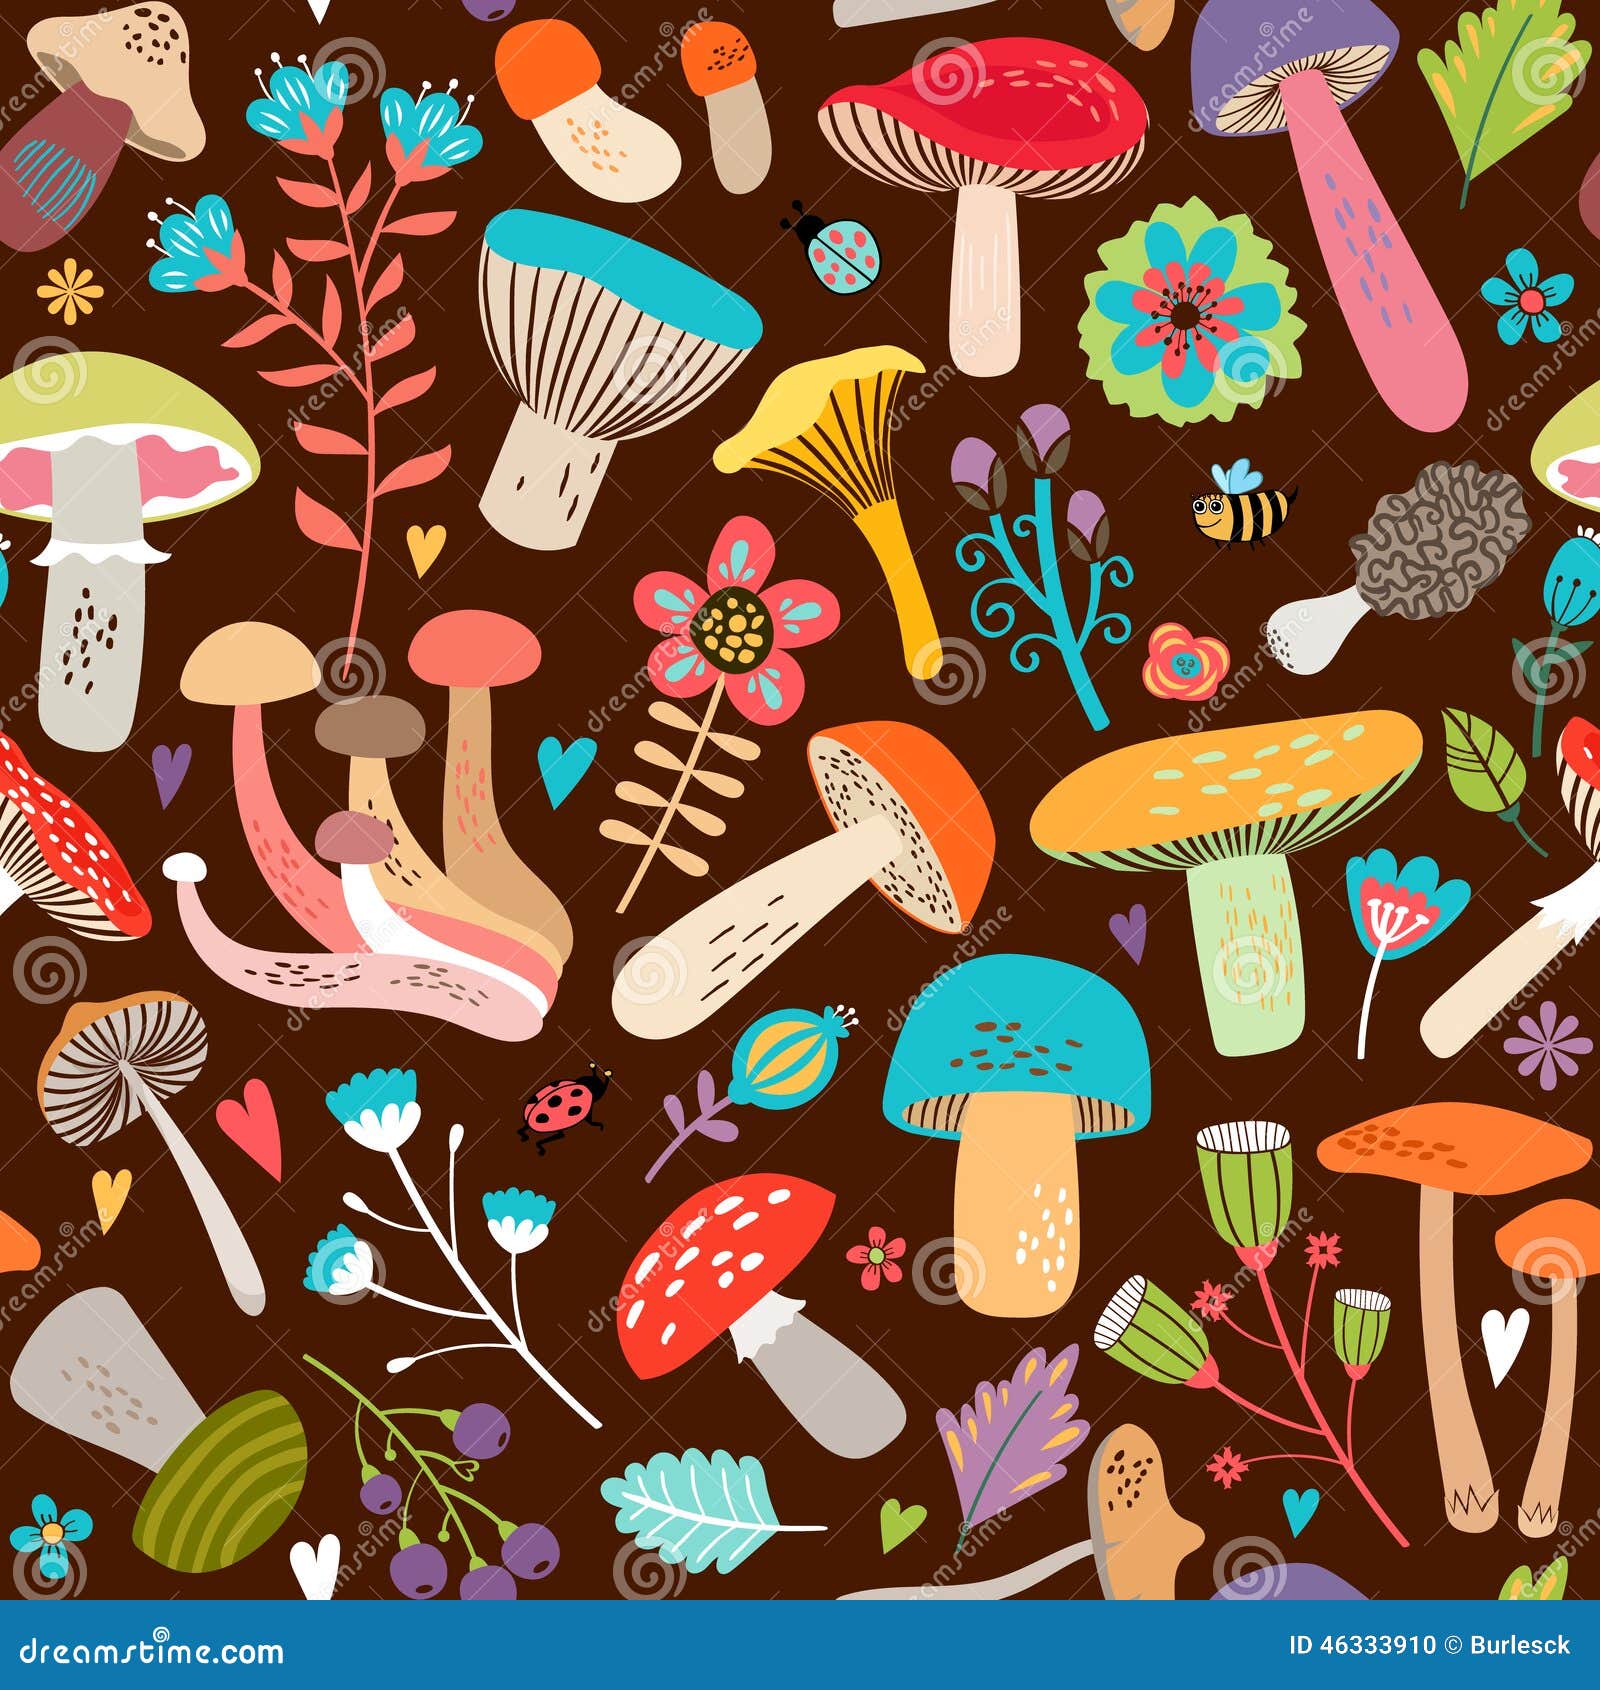 Assorted Background Brown Leaves Mushrooms Stock Illustrations – 2 ...